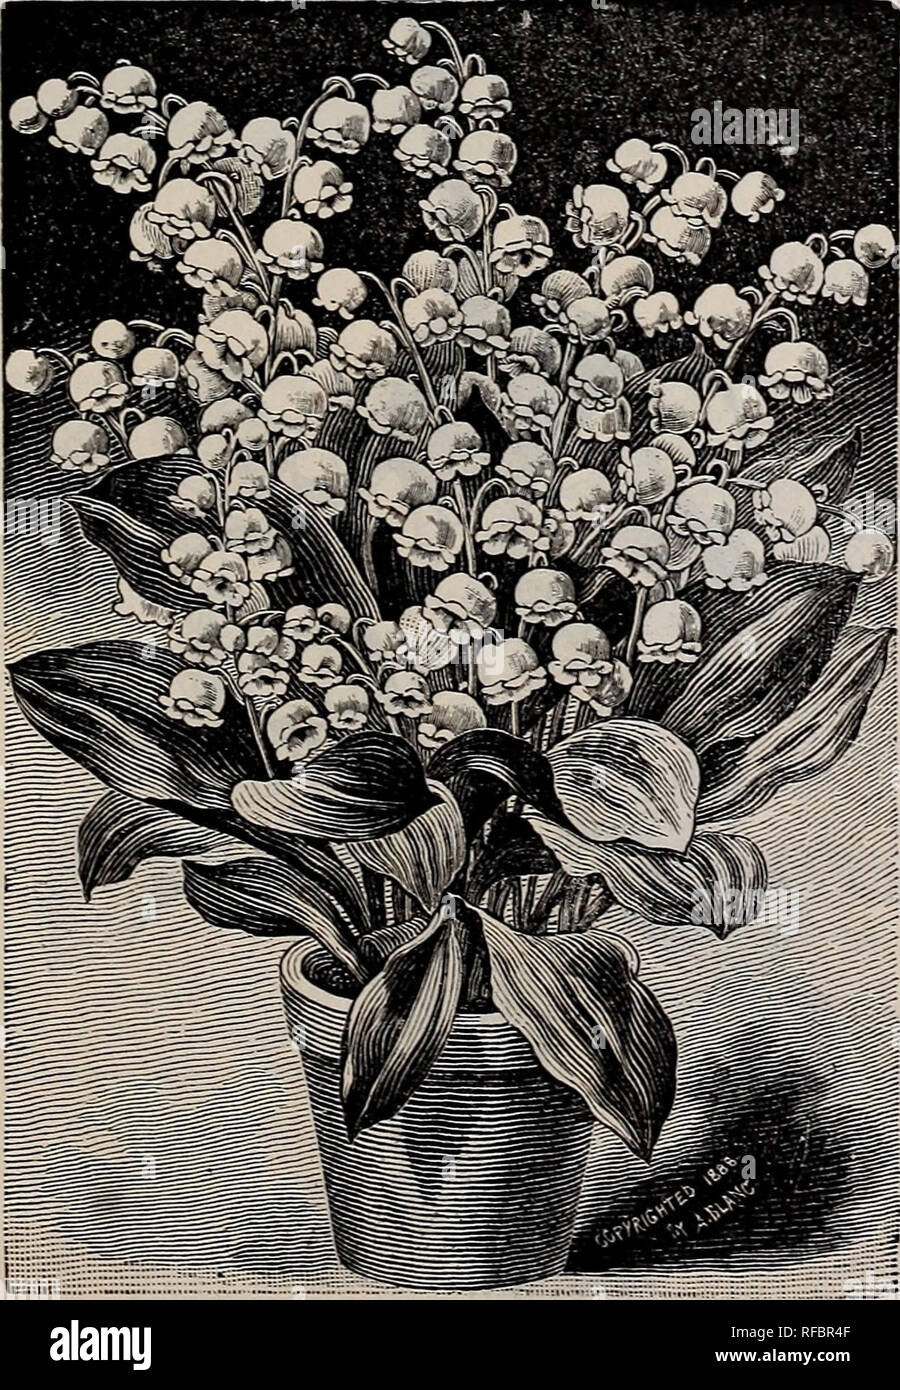 . Bulbs for fall planting. Nursery stock, New York (State), New York, Catalogs; Bulbs (Plants), Catalogs; Flowers, Catalogs. Lilium auratum. Each Per doz.. Lily-of-the- Valley. Batemanni. Richly colored, unspotted flowers of bright apricot tint; a most beautiful variety; 3 to 4 feet high...$0 15 $1 50 Krameri. White, slightly tinged with red; sweetv-scented 15 1 50 Leichtlinii, Orange-red, with crimson spots; 2 to 3 feet high 20 2 00 Leichtlinii, Canary Yellow. Like above, but in color pure canary-yellow 40 4 00 LI L Y-OF-TH E-VALLEY. (CONVALLARIA MAJALIS.) Ready in November. One of the most b Stock Photo